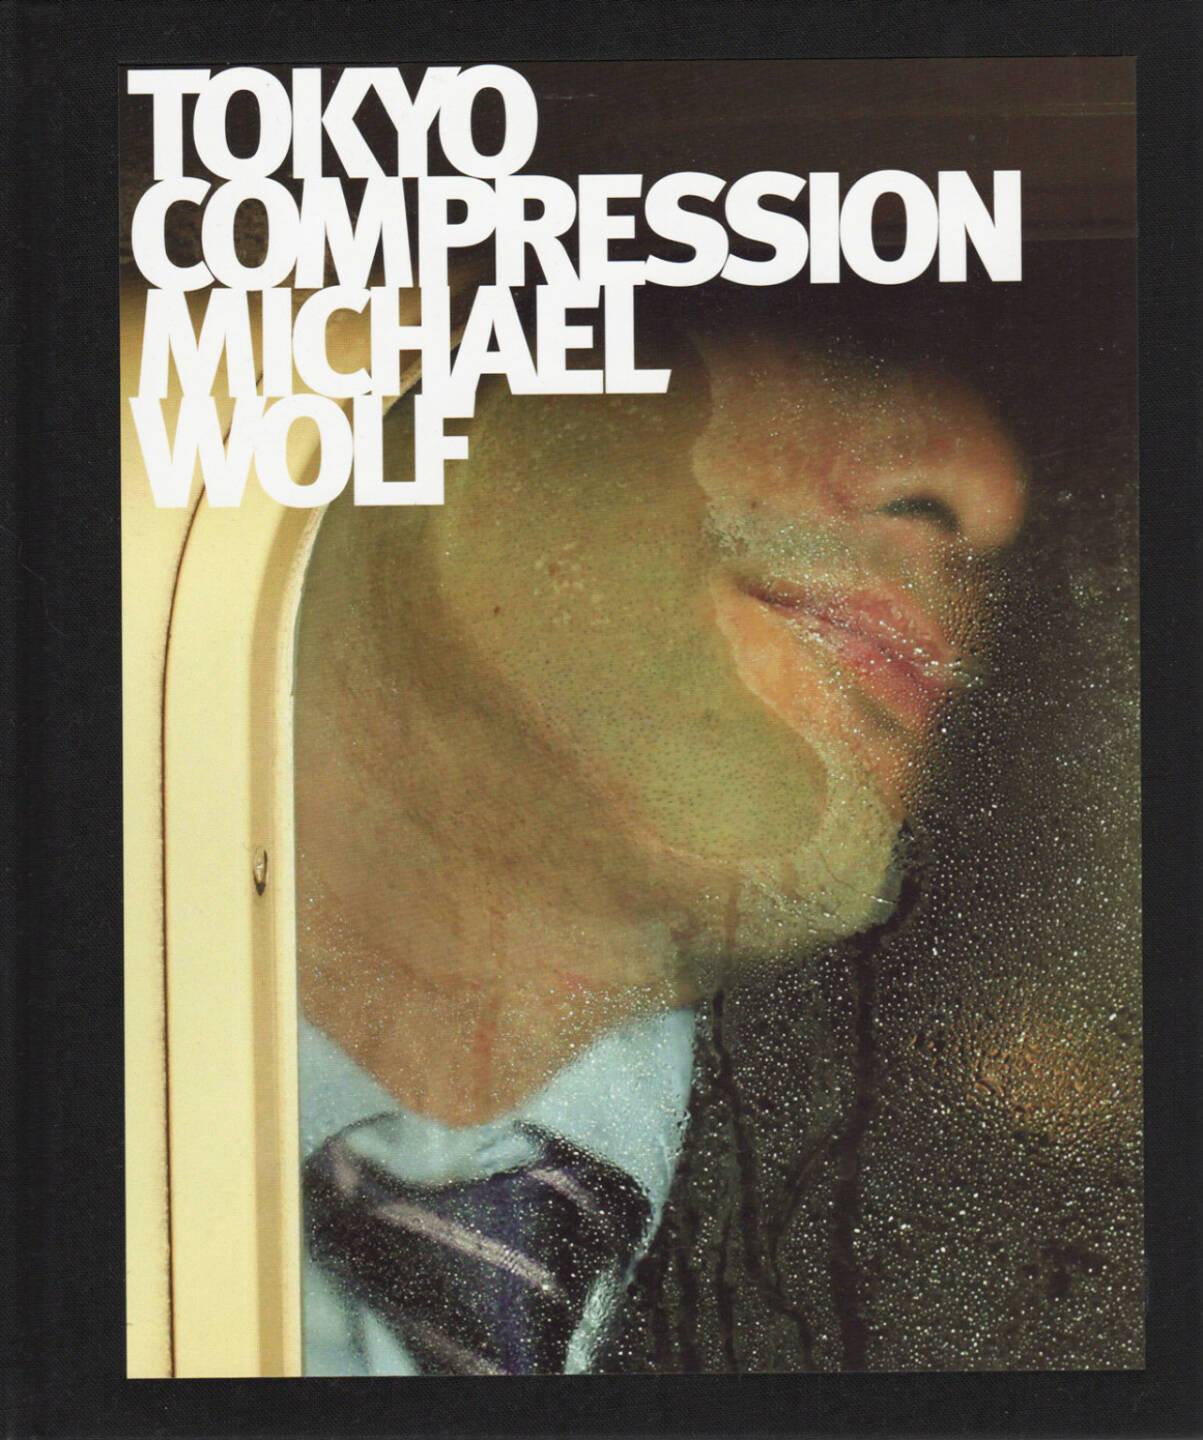 Michael Wolf - Tokyo Compression, 250-350 Euro, http://josefchladek.com/book/michael_wolf_-_tokyo_compression